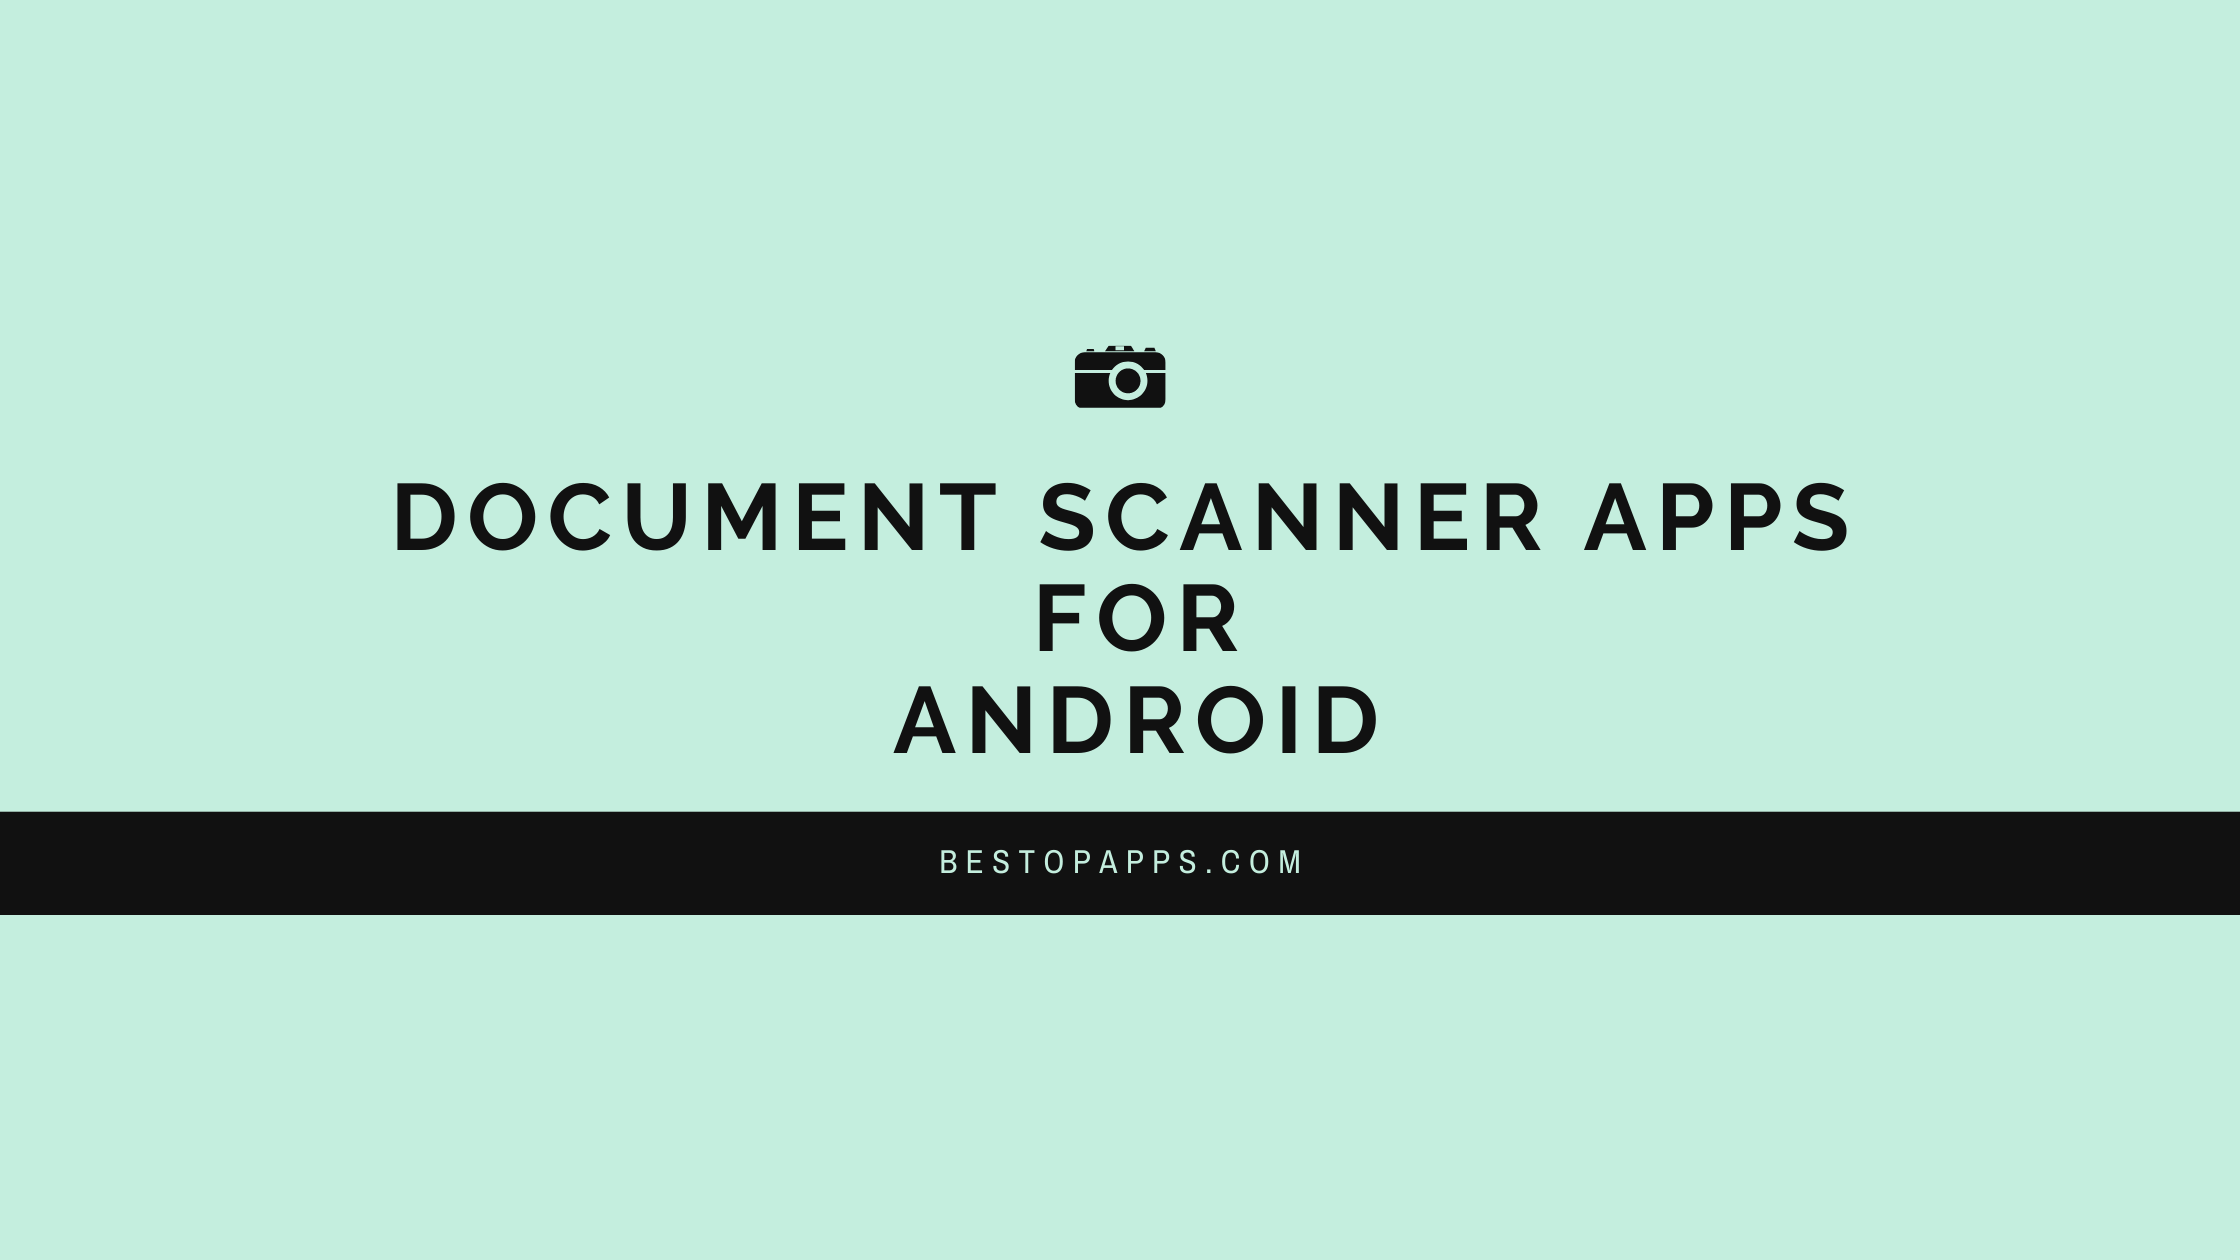 Document Scanner Apps for Android